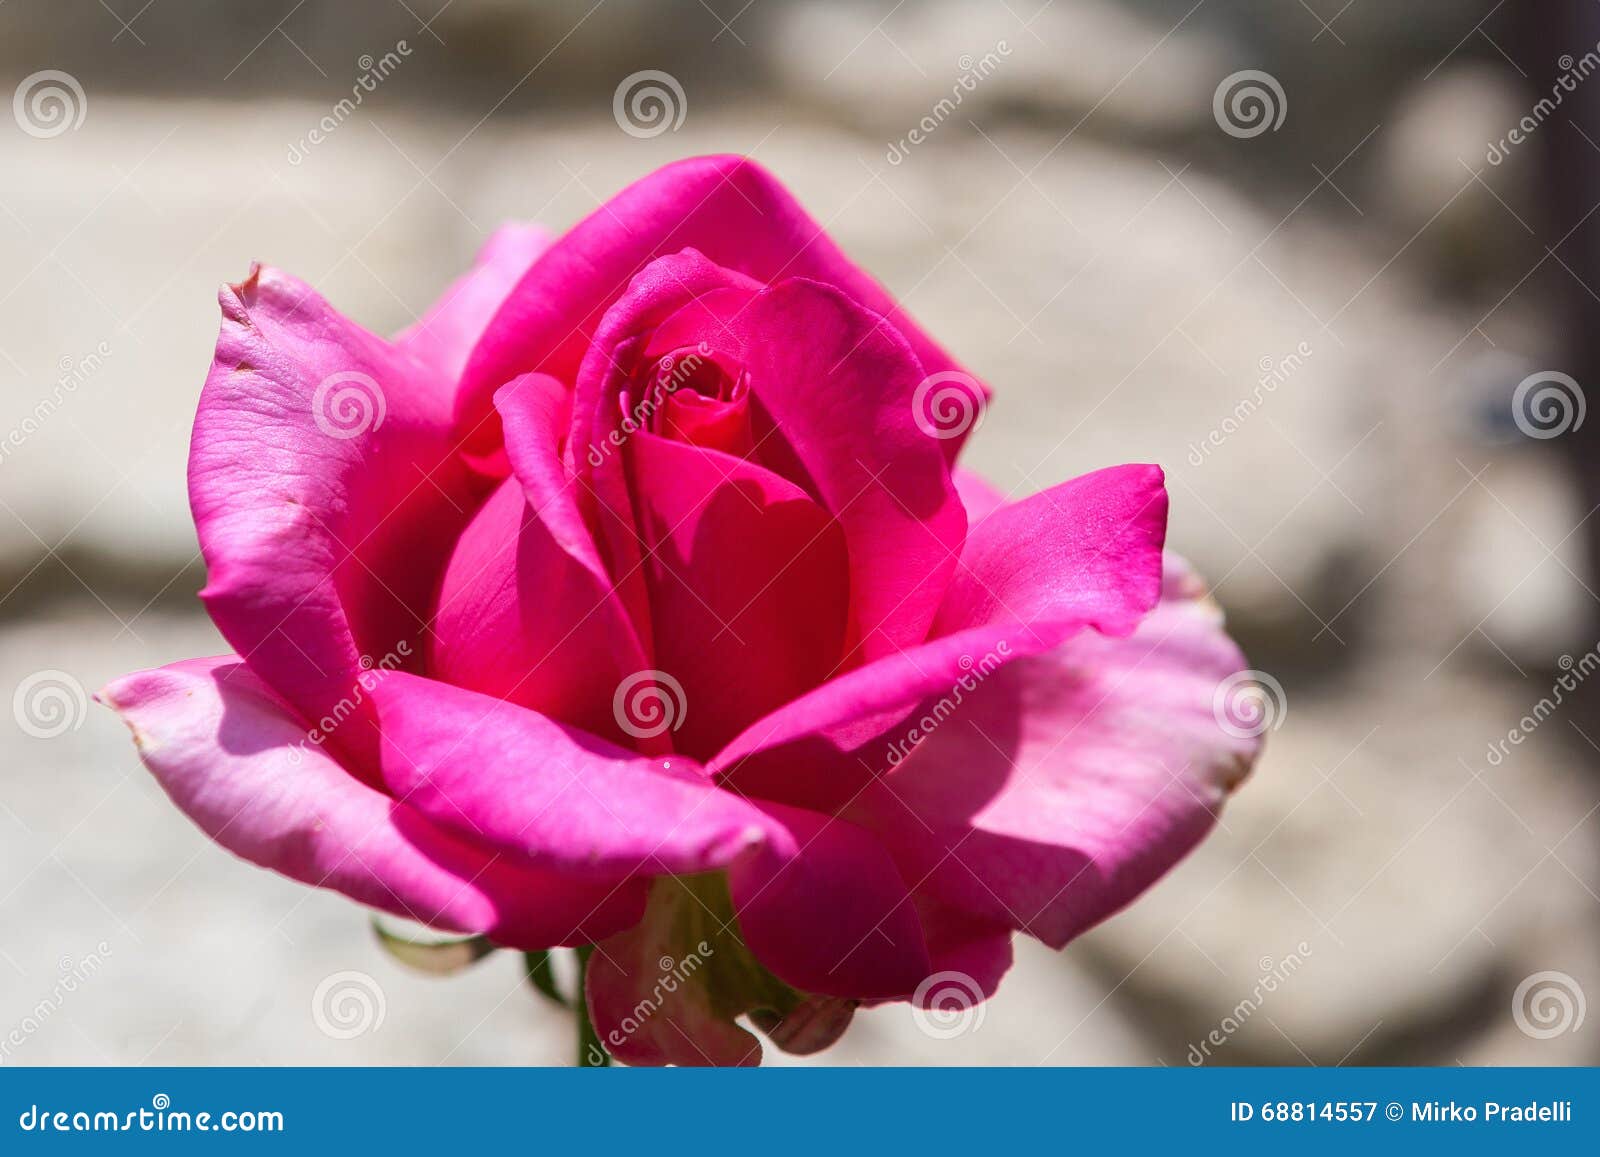 Rose in spring stock image. Image of flower, spring, nature - 68814557